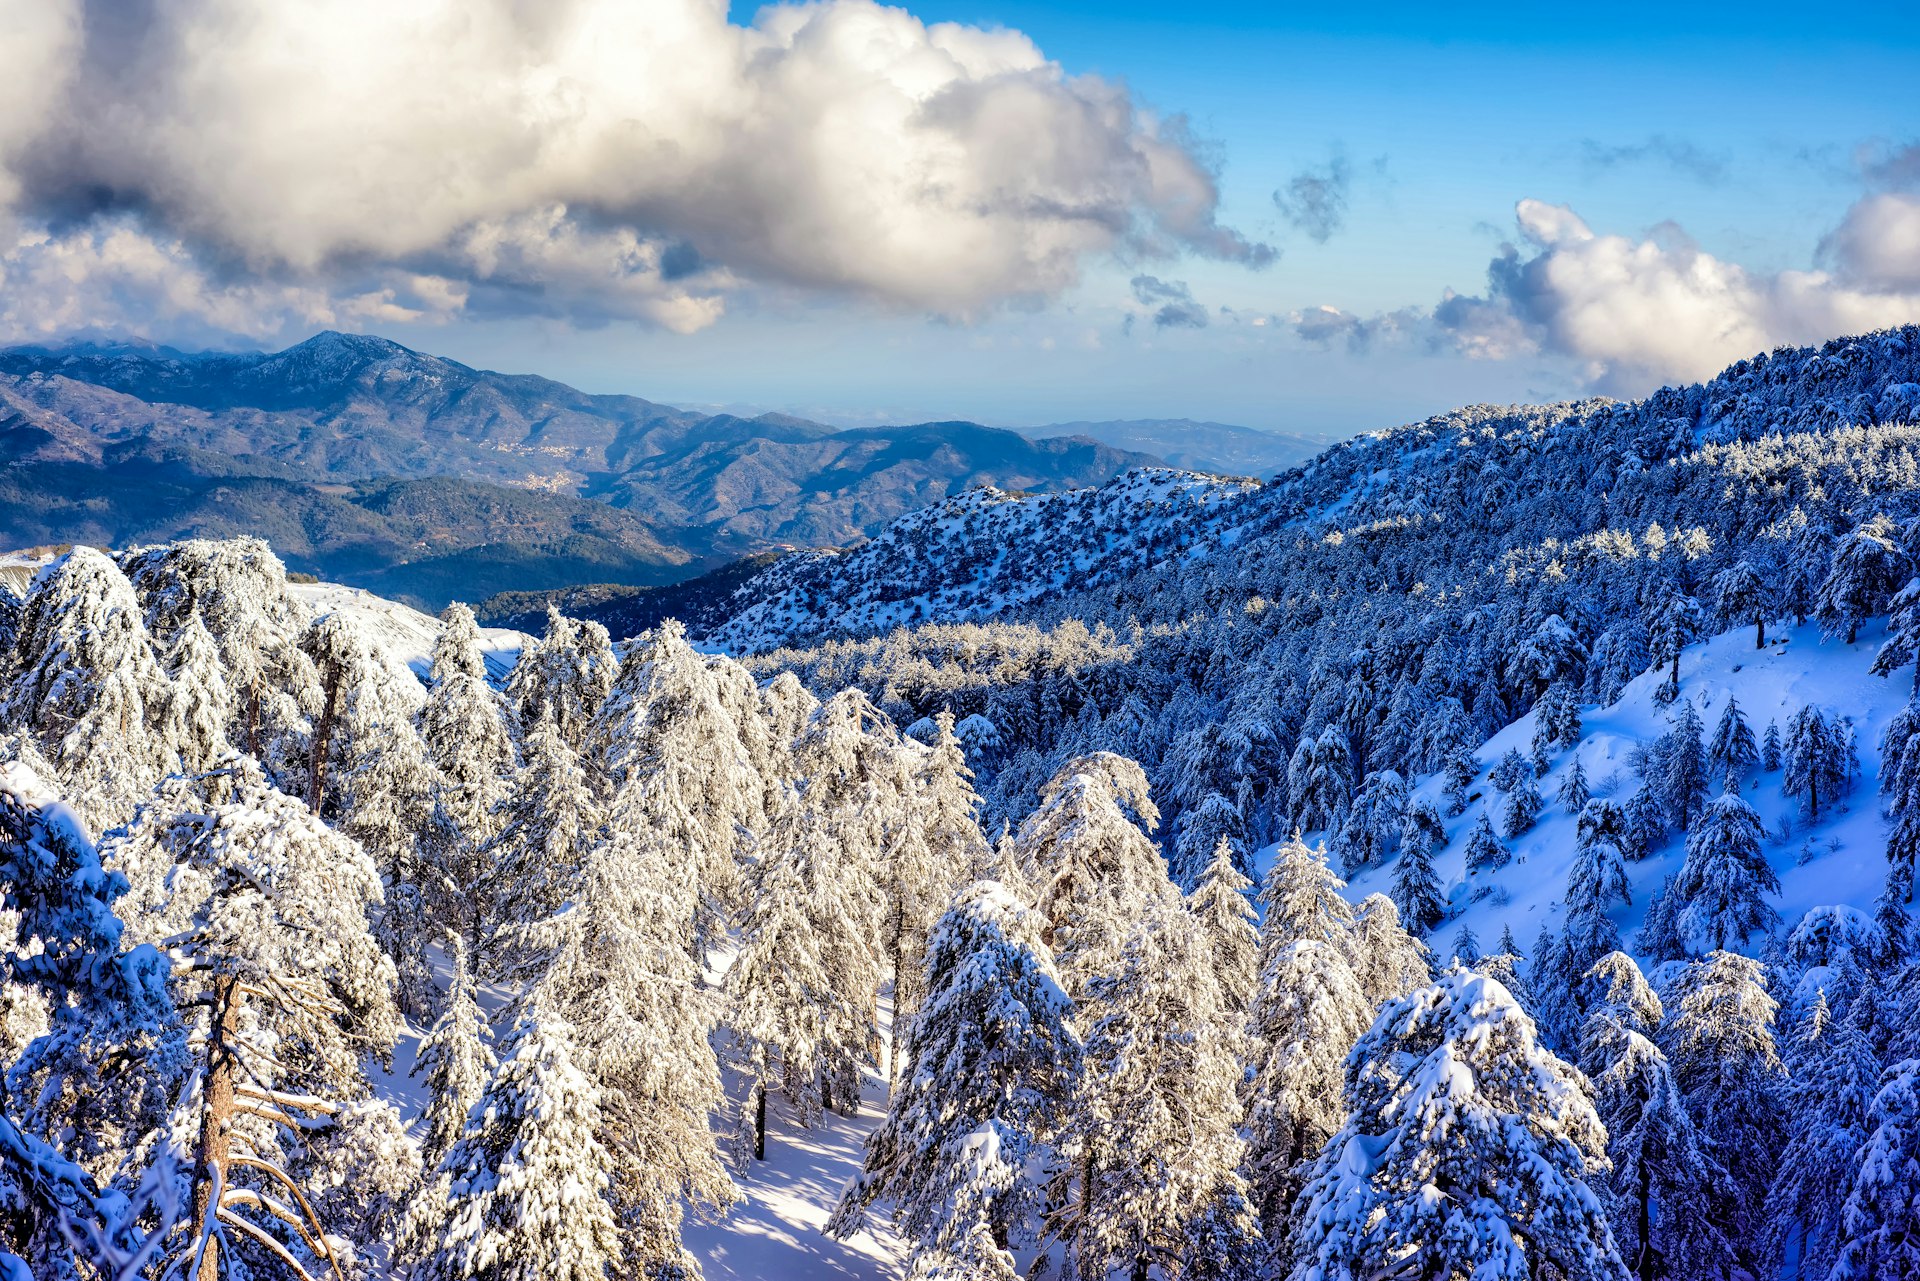 Snow over pine forests in the Troodos mountain range